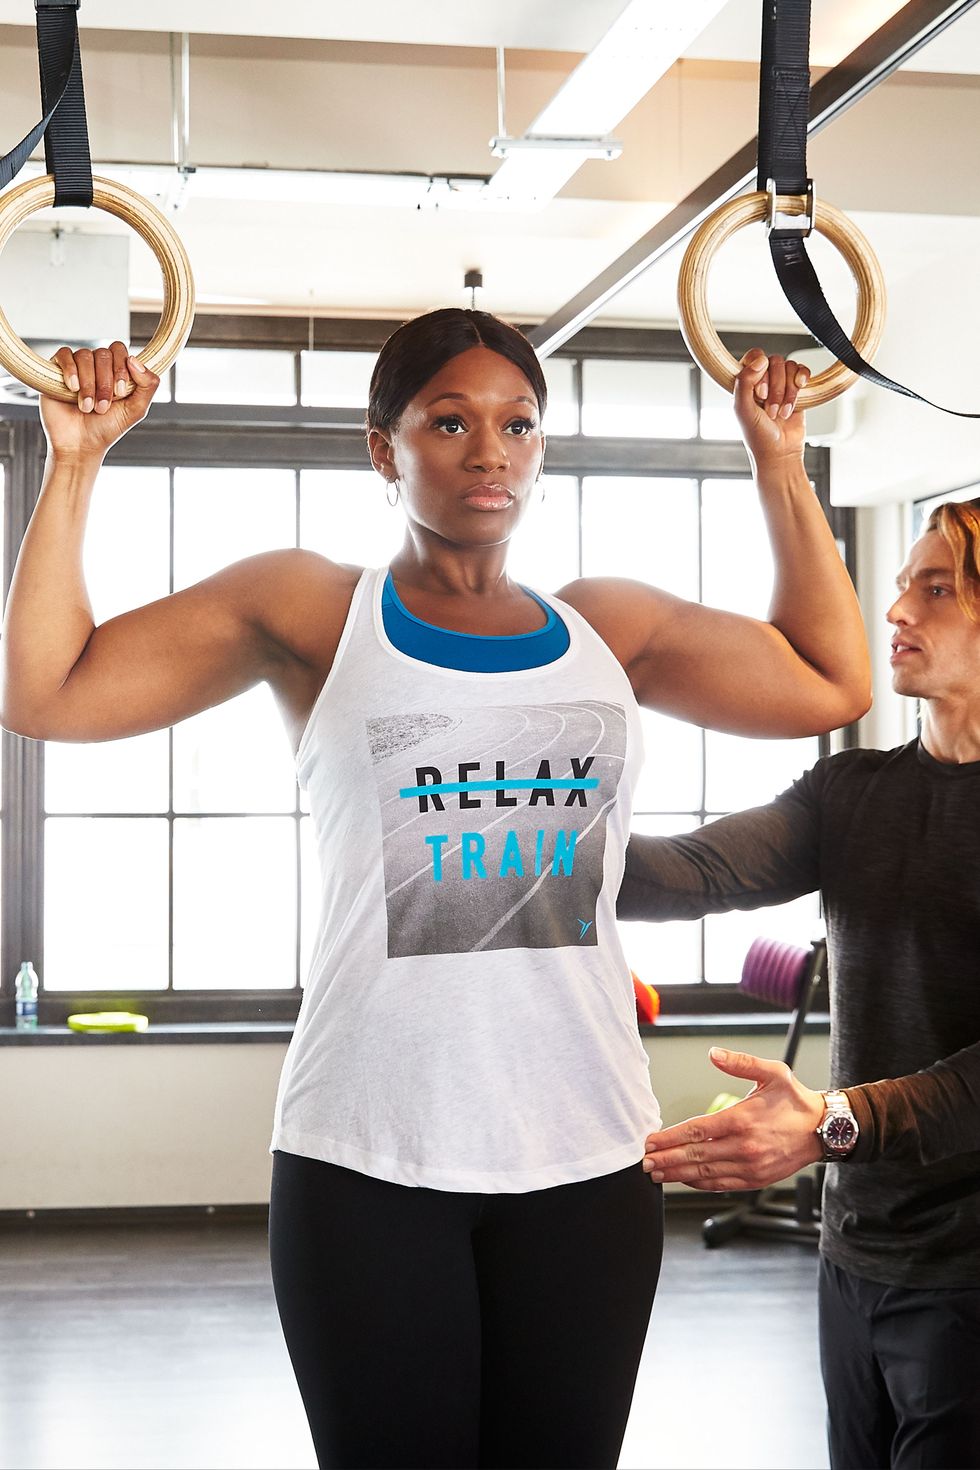 <p>"If you have something to hang on to that can fully support your weight, warm up with negative pull-ups," says Pisano. "Essentially you start in an engaged pull up position, and slowly lower yourself down. They're great for jumpstarting the biceps and activating the latissimus muscles in your back." </p><p>Old Navy Go-Dry Cool Graphic Tank in Island Tide, $10, <a href="http://oldnavy.gap.com/browse/product.do?cid=84254&vid=1&pid=938983532" target="_blank">oldnavy.com</a>; Old Navy High Support Racerback Sports Bra in Delta Hand, $19.94, <a href="http://oldnavy.gap.com/browse/product.do?cid=1034331&vid=1&pid=429322112" target="_blank">oldnavy.com</a>; Fabletics Provence Leggings in Black/Liquid Black, $79.95, <a href="http://www.fabletics.com/index.cfm?action=shop.viewproduct&ha=863E11D5482766AF6A9A963579F6CC5B&pid=4867582" target="_blank">fabletics.com</a>; Nike Air Zoom Fit Agility 2 in Black/White, $130, <a href="http://store.nike.com/us/en_us/pd/air-zoom-fit-agility-2-training-shoe/pid-10337859/pgid-10337860" target="_blank">nike.com</a></p>